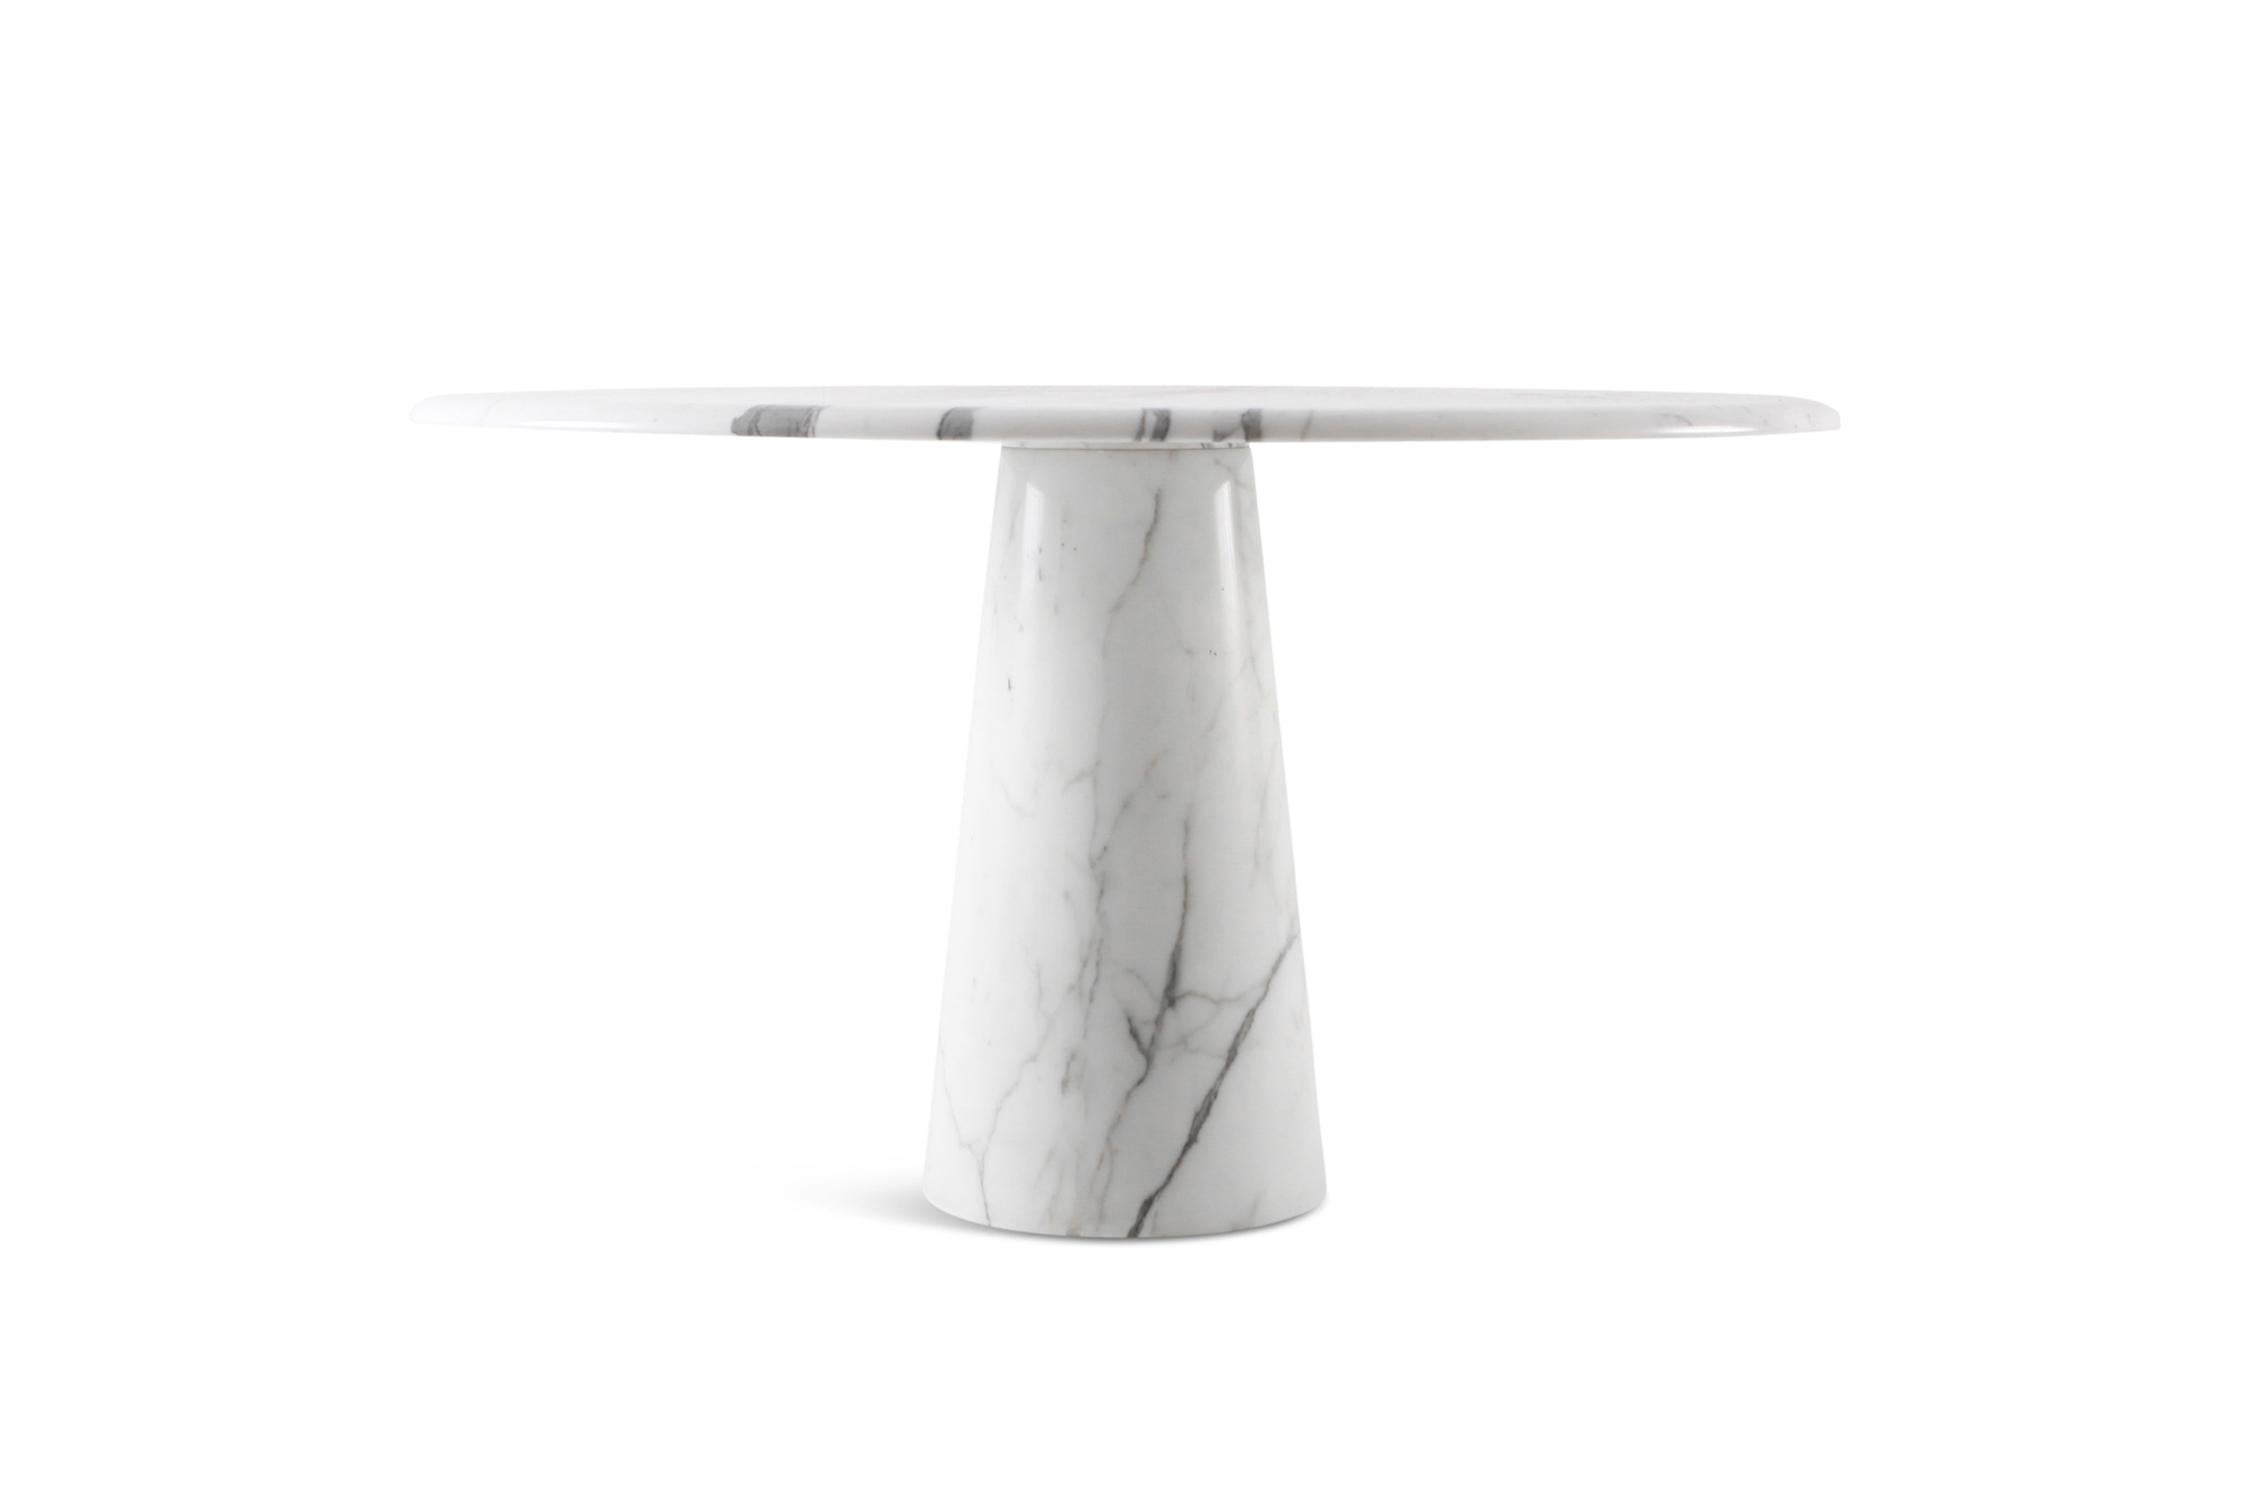 carrara marble round dining table